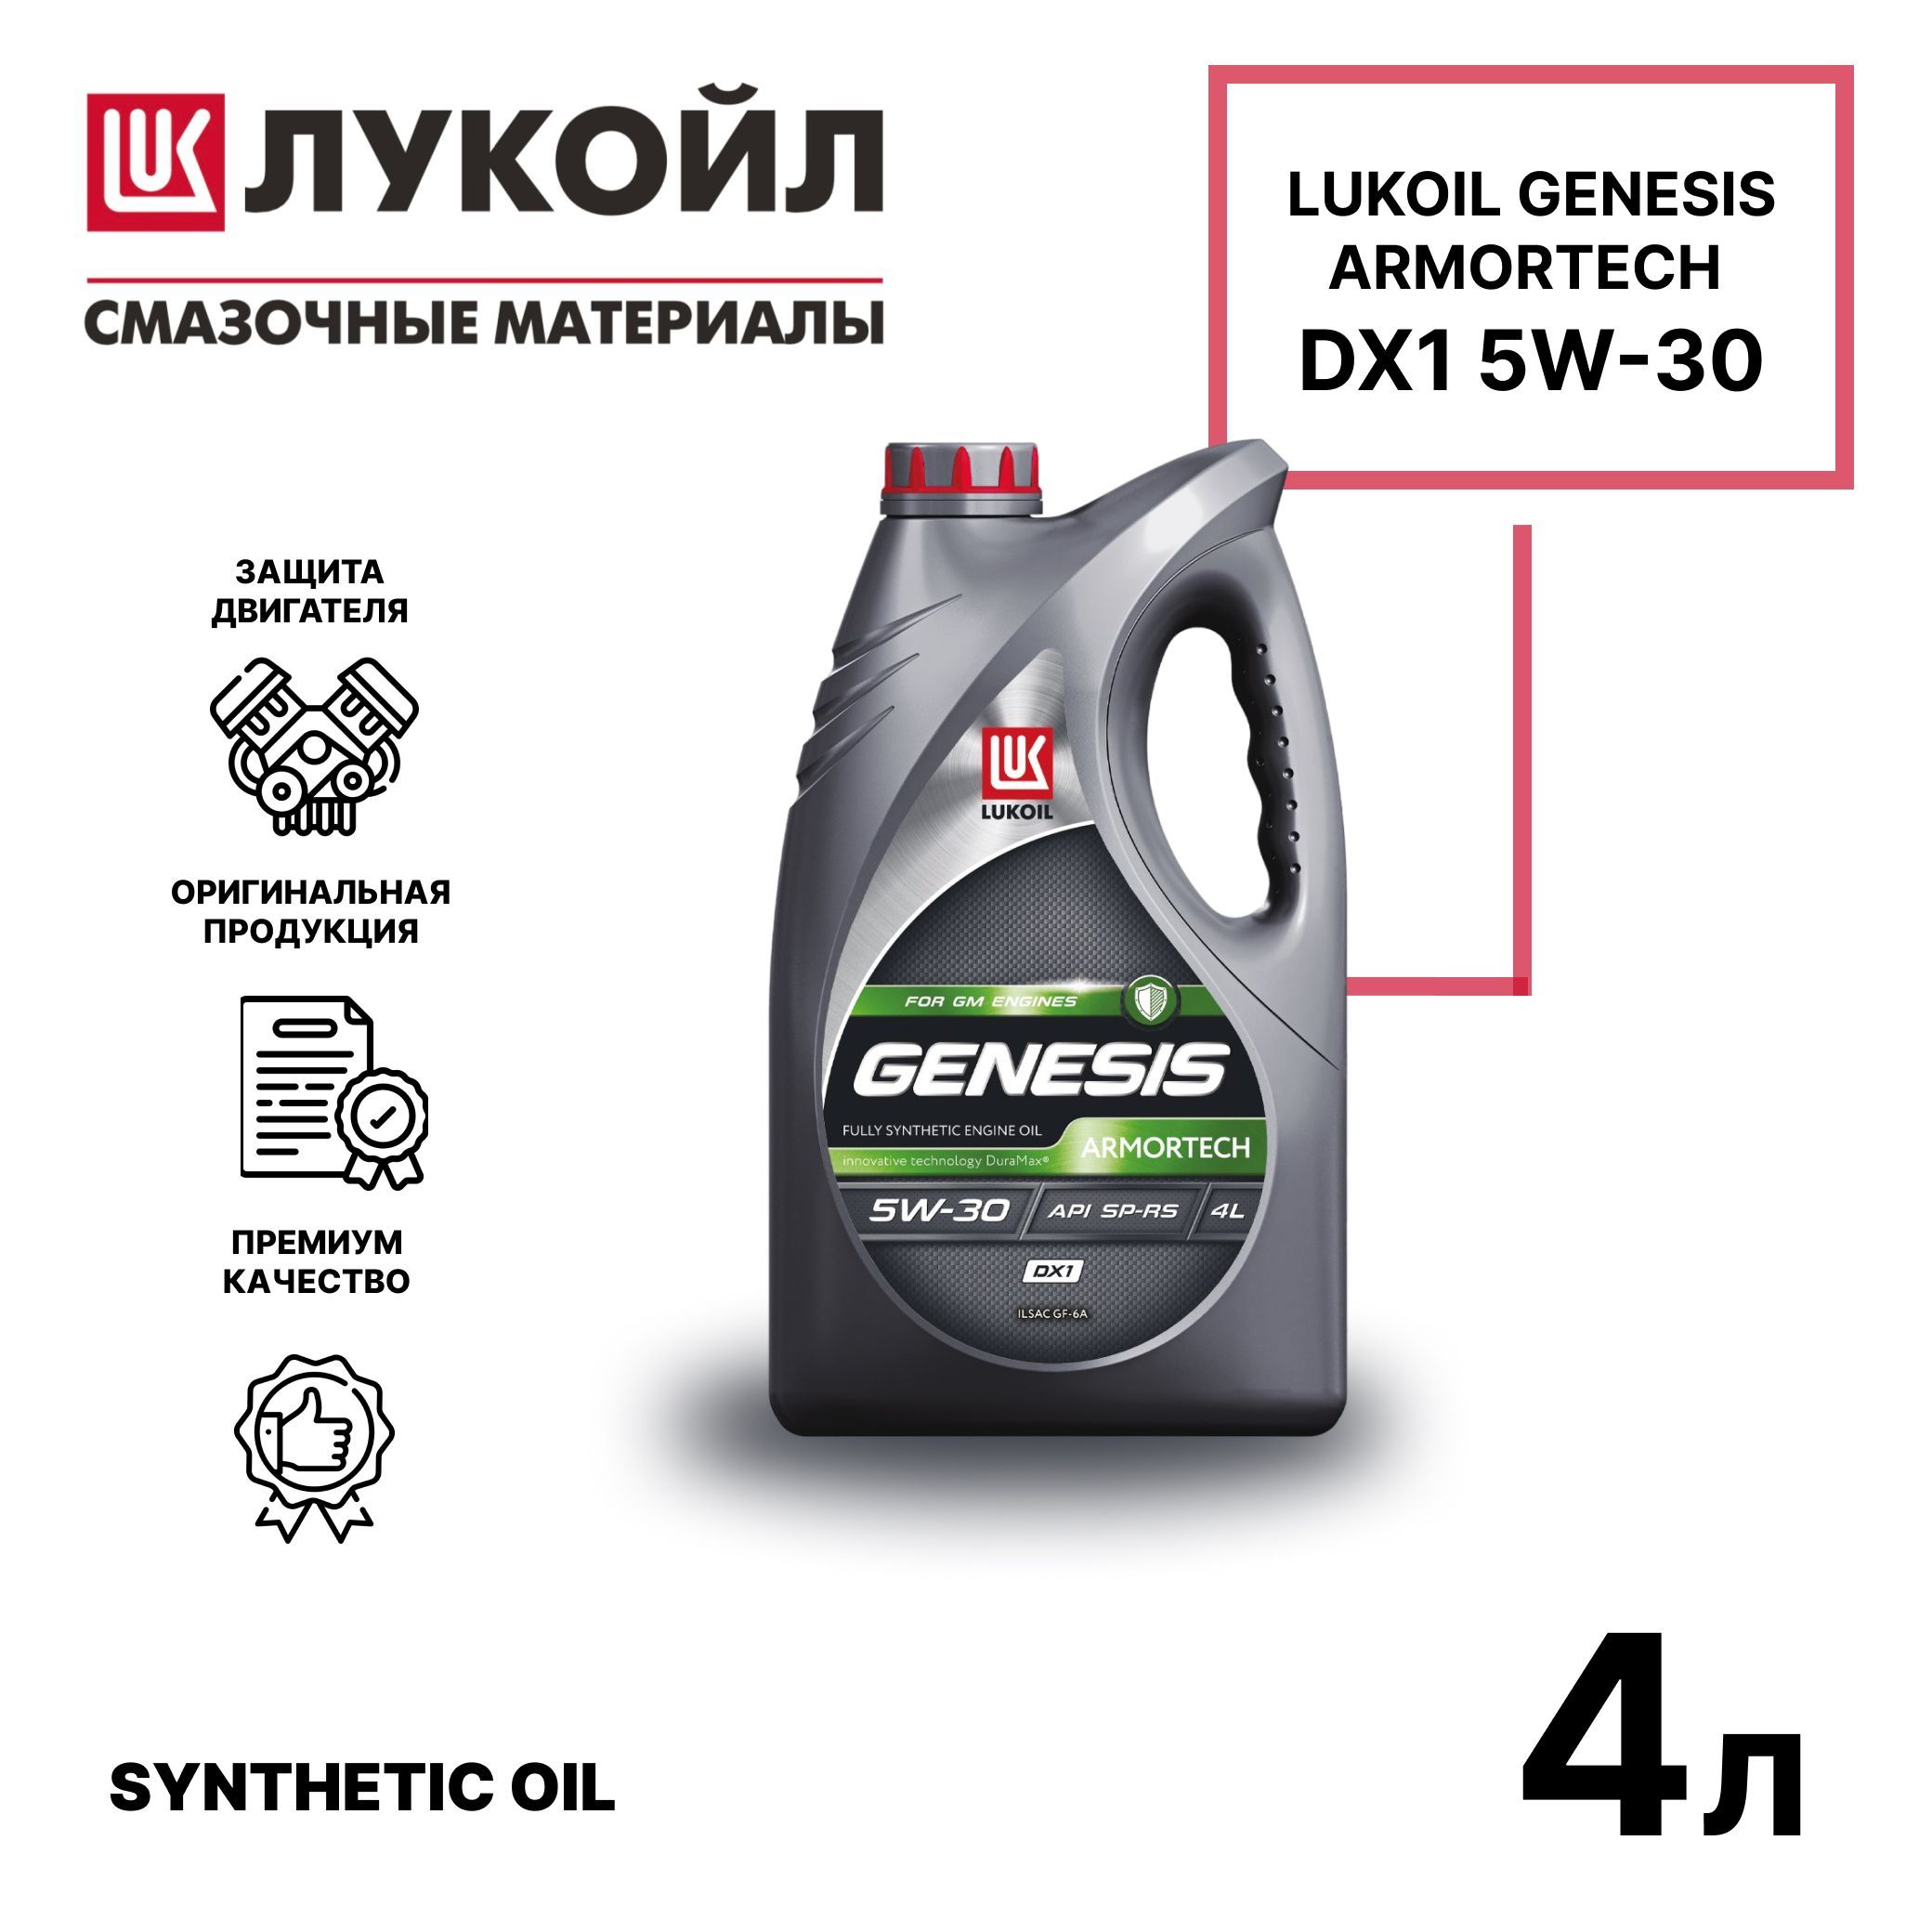 Лукойл dx1 5w-30. Lukoil dx1. Масло лукойл dx1